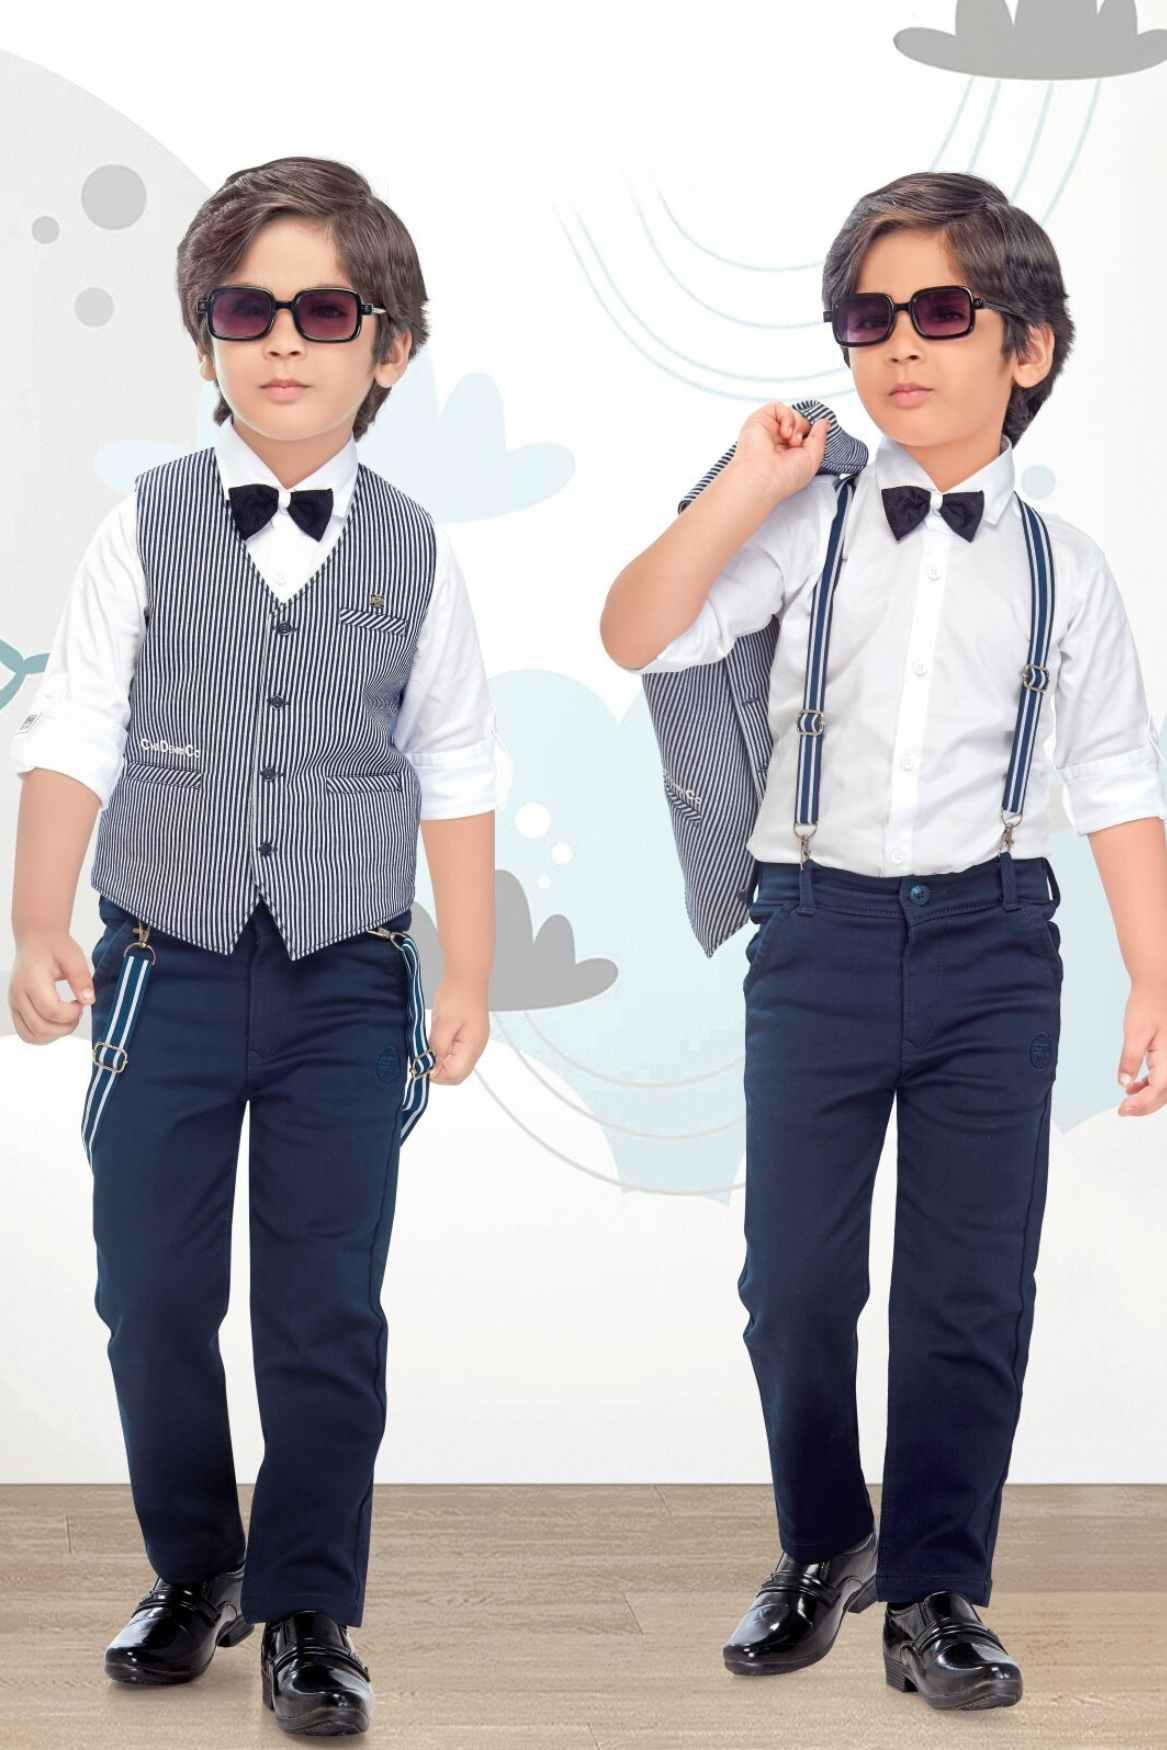 Navy Blue Waist Coat Set With White Shirt And Bow For Boys - Lagorii Kids